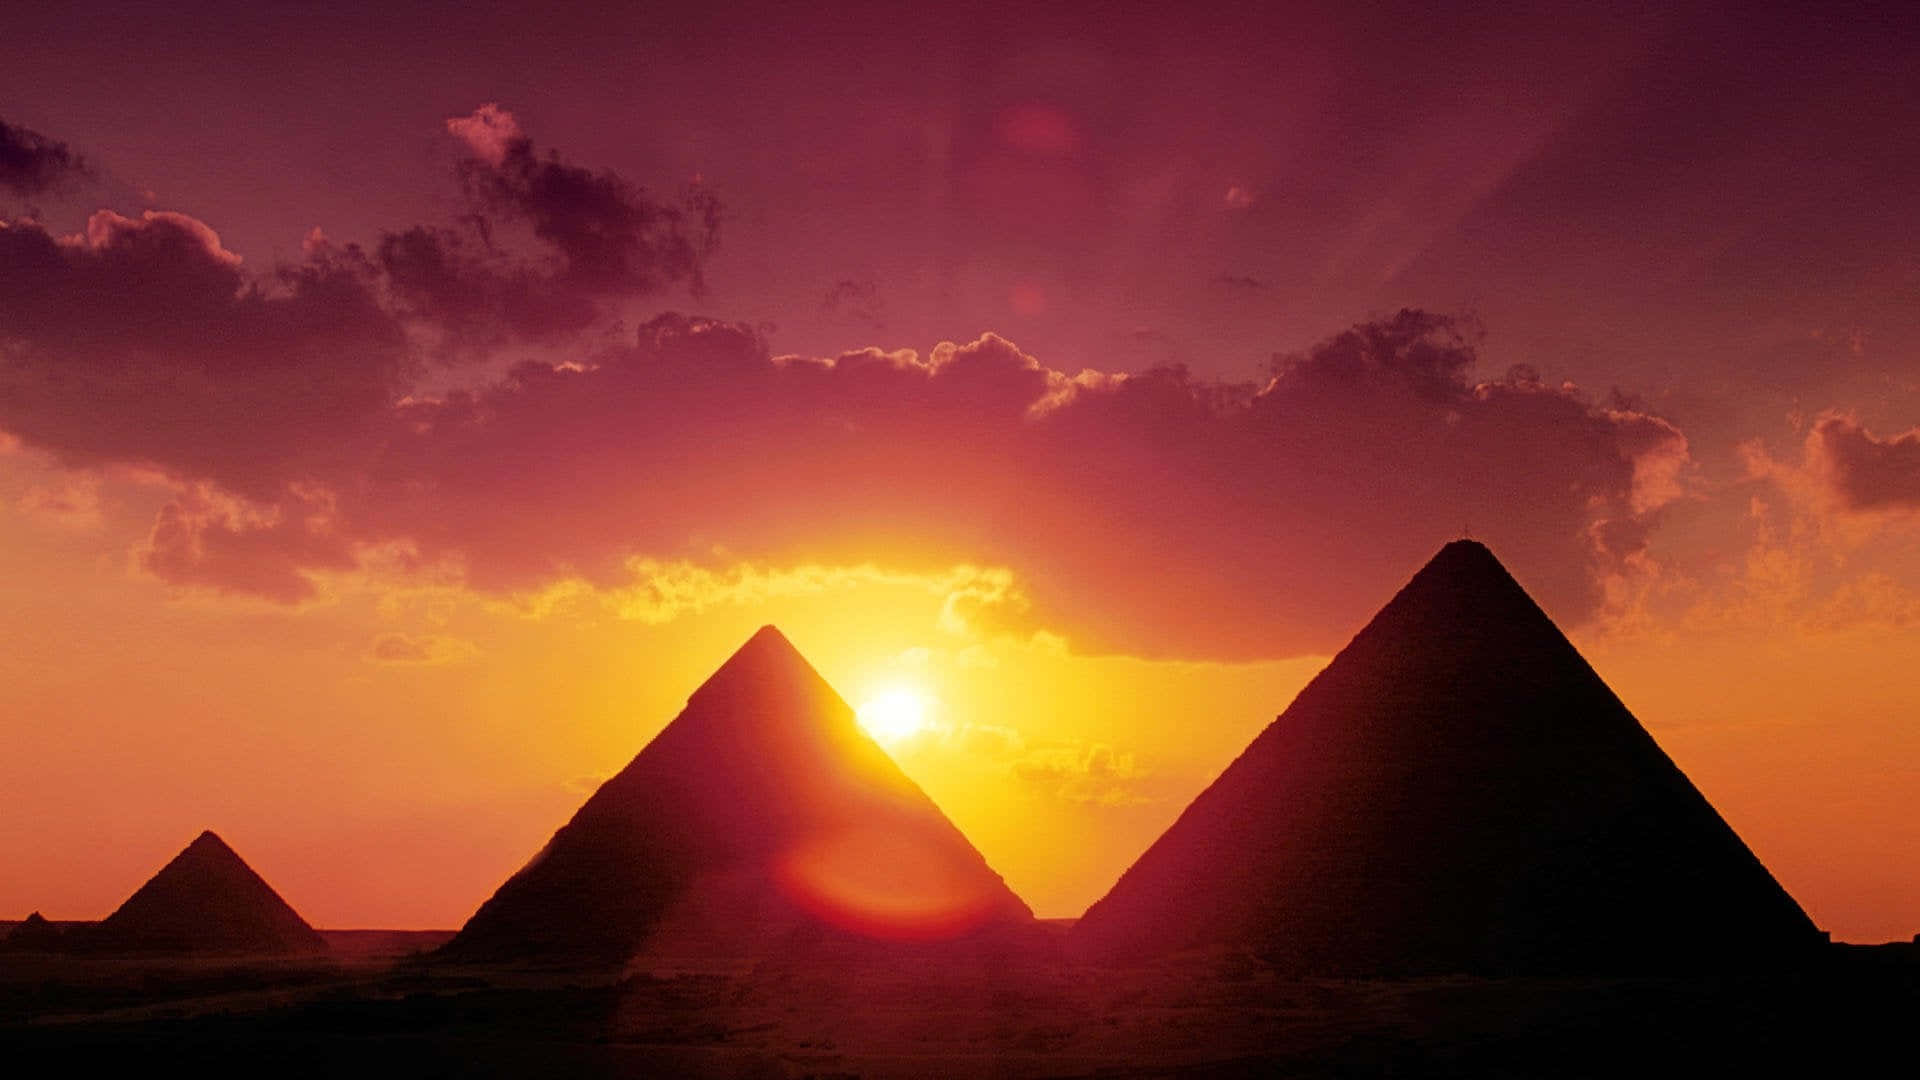 Explore Ancient Egypt With This Stunning Landscape